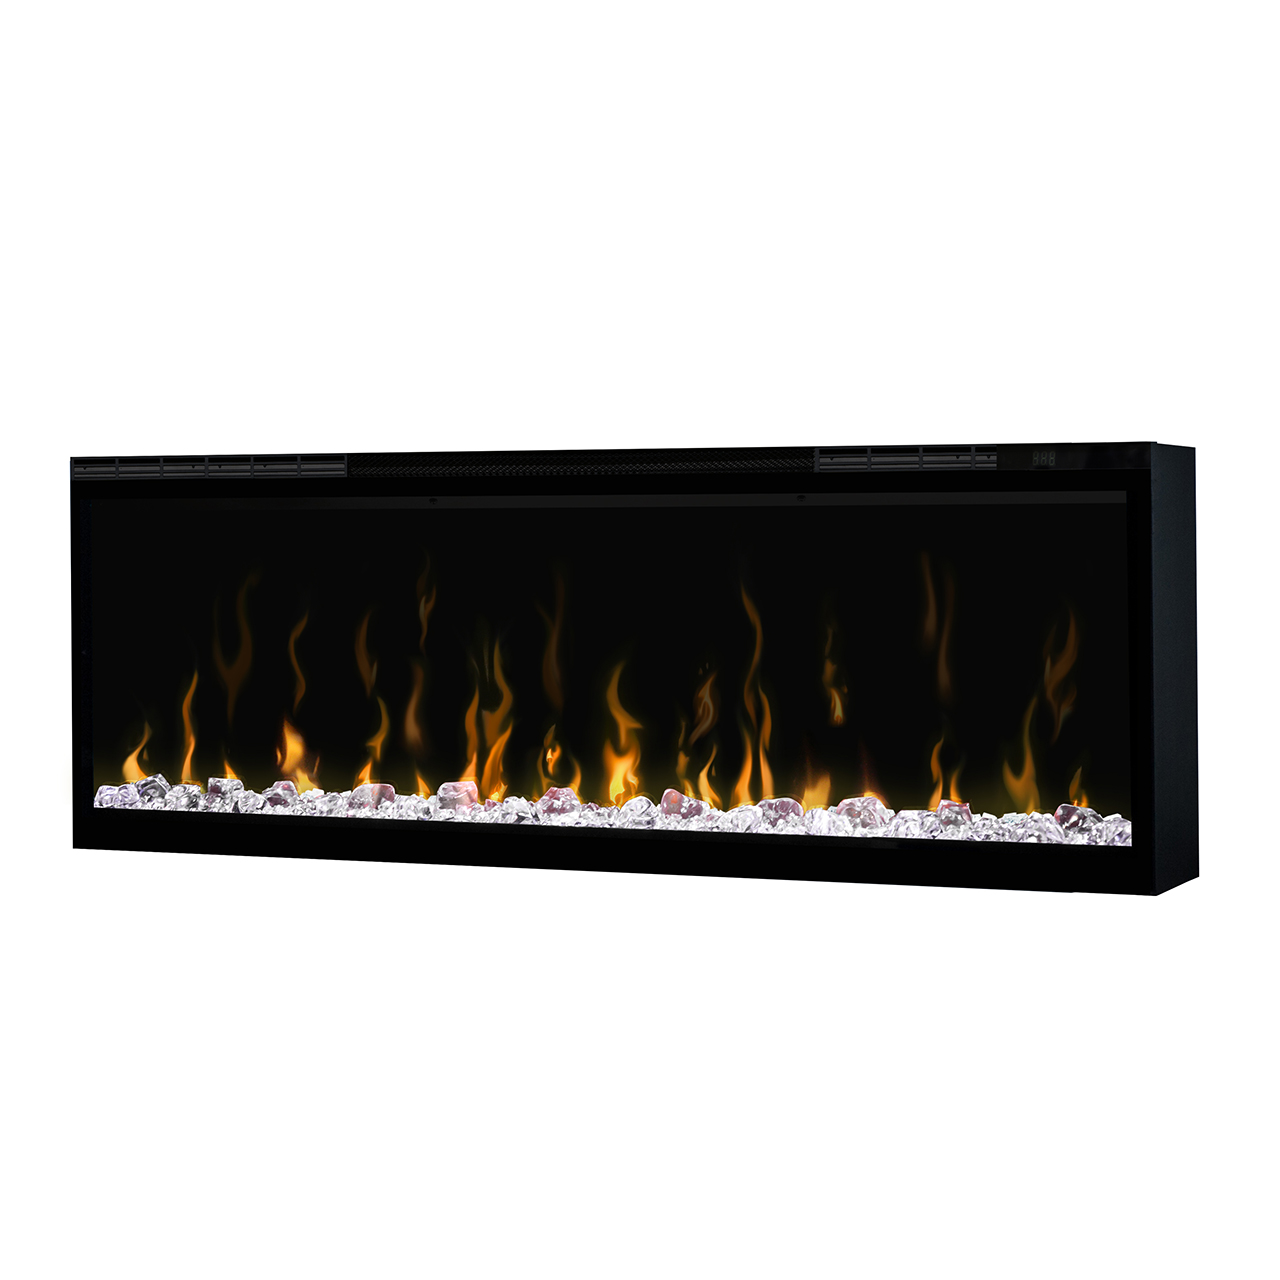 ignitexl 50 inch linear electric fireplace product image